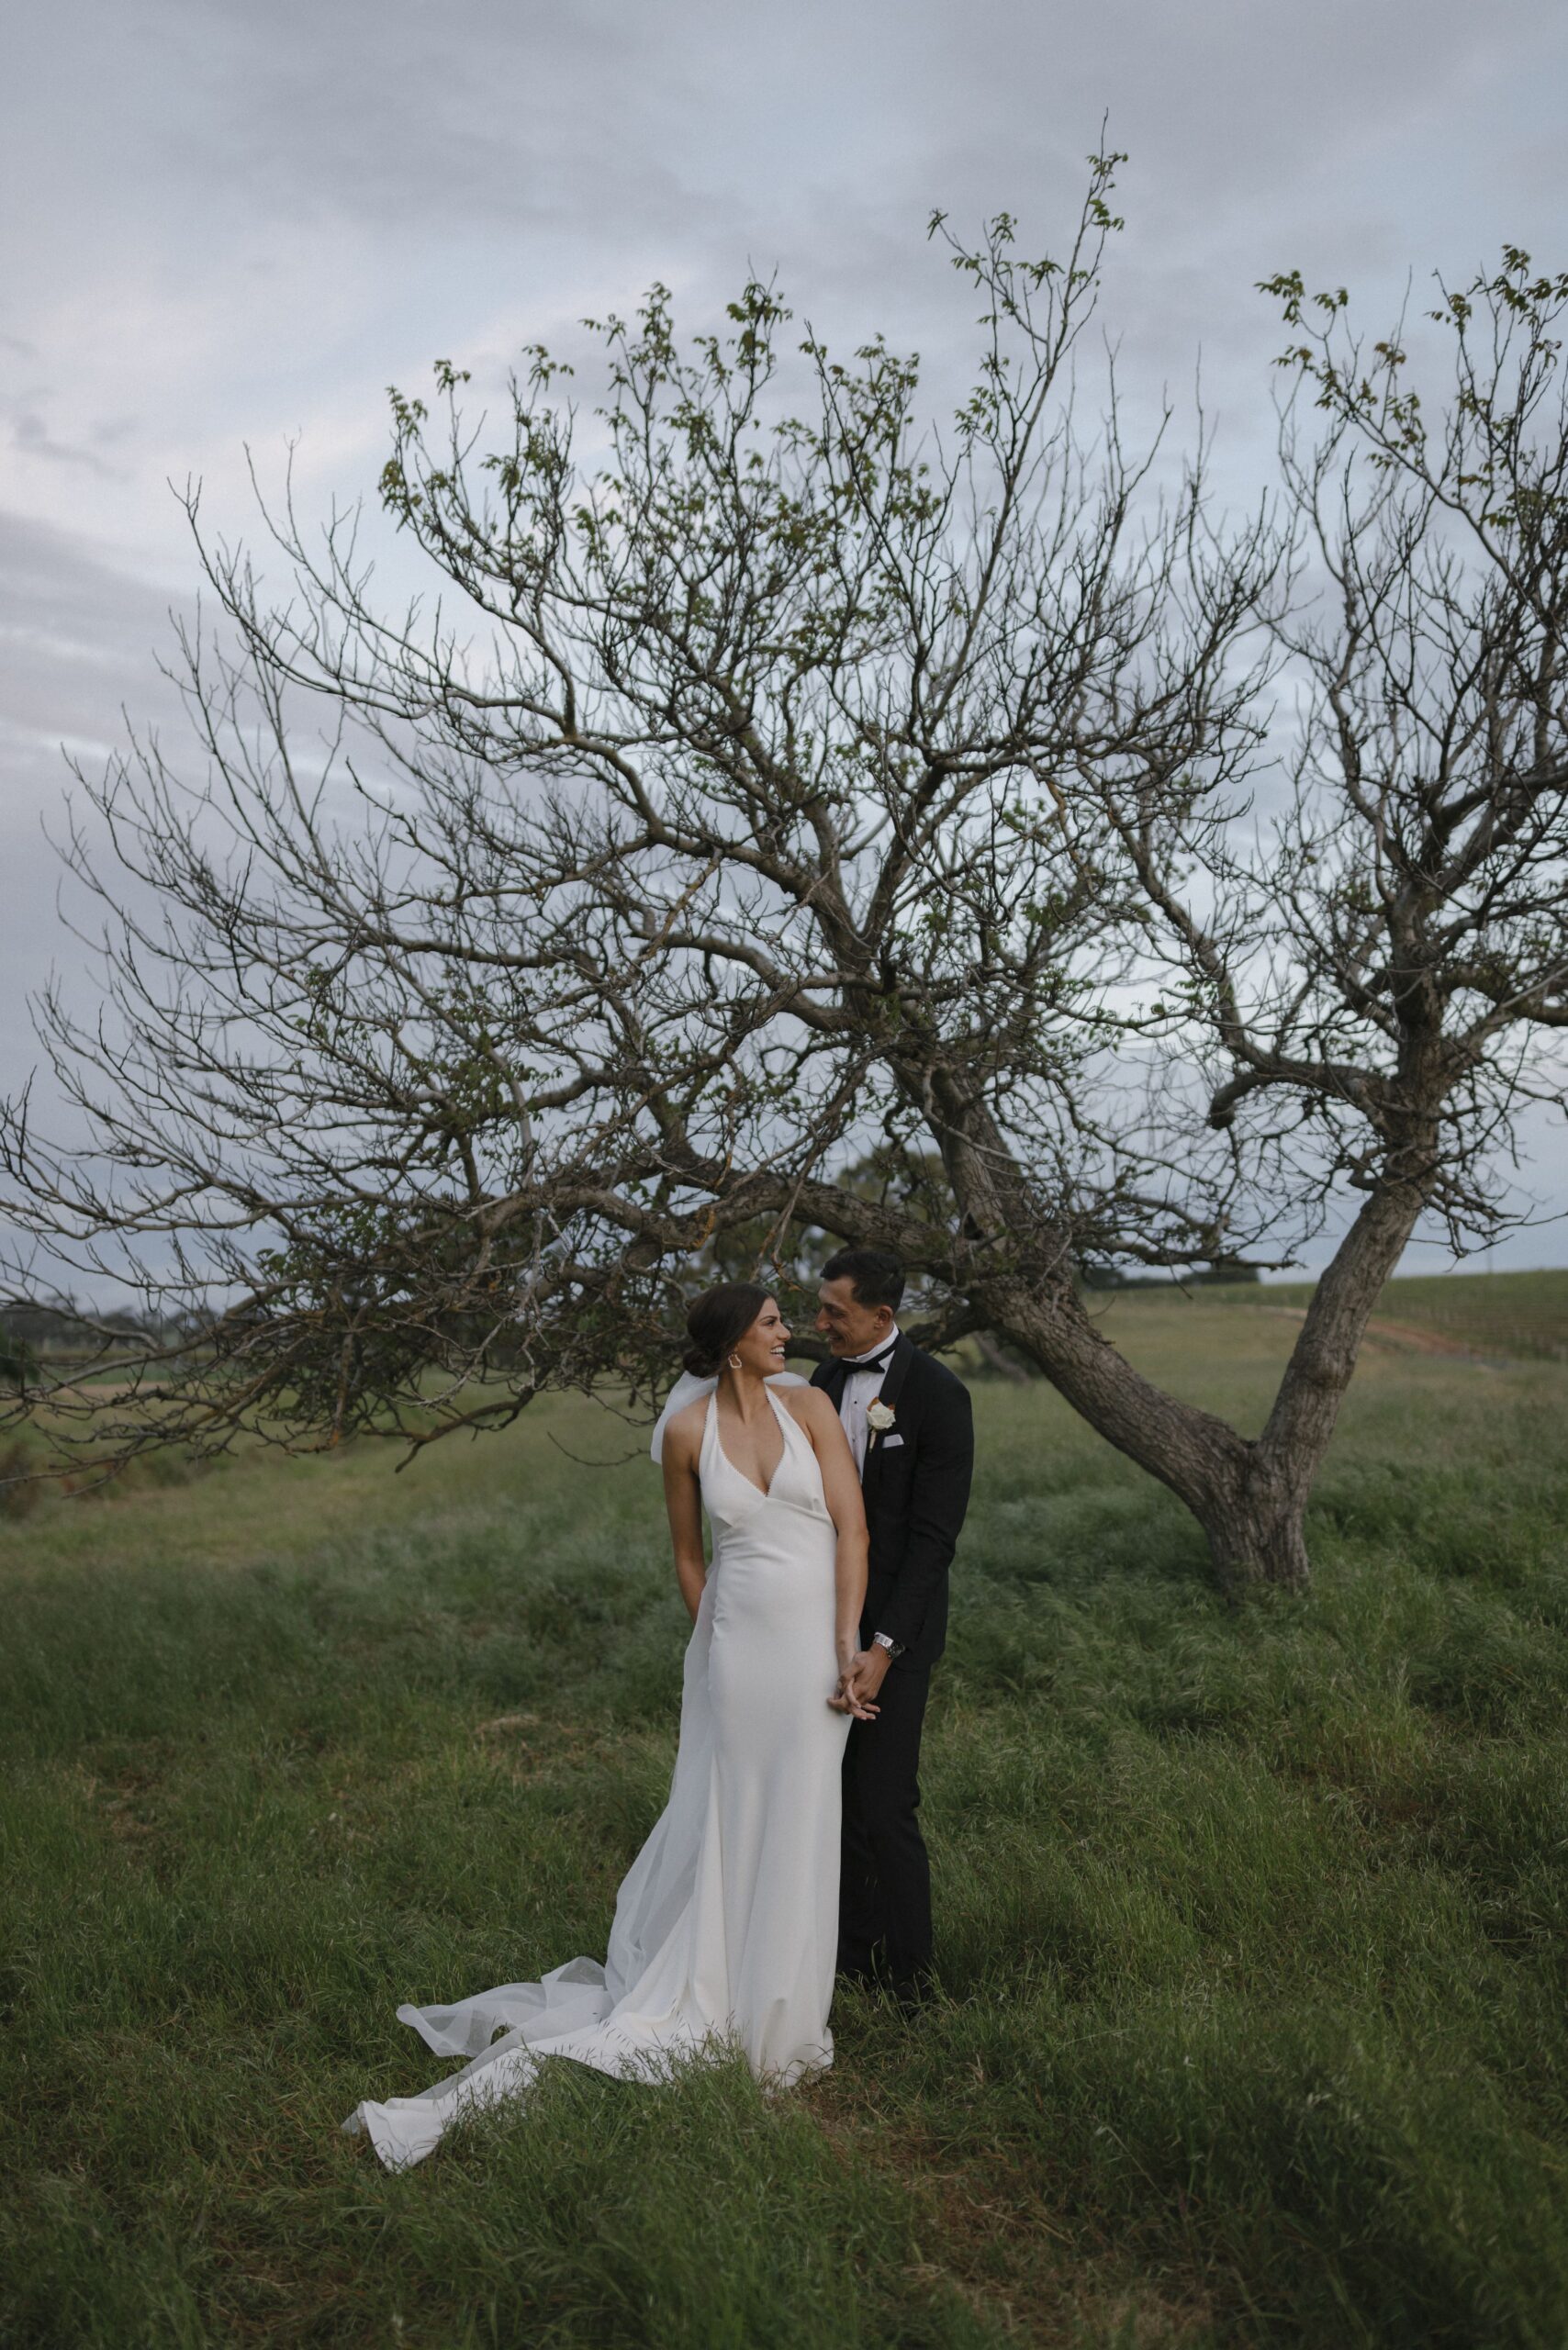 Olivia and Patrick standing under a bare tree amongst deep green grass